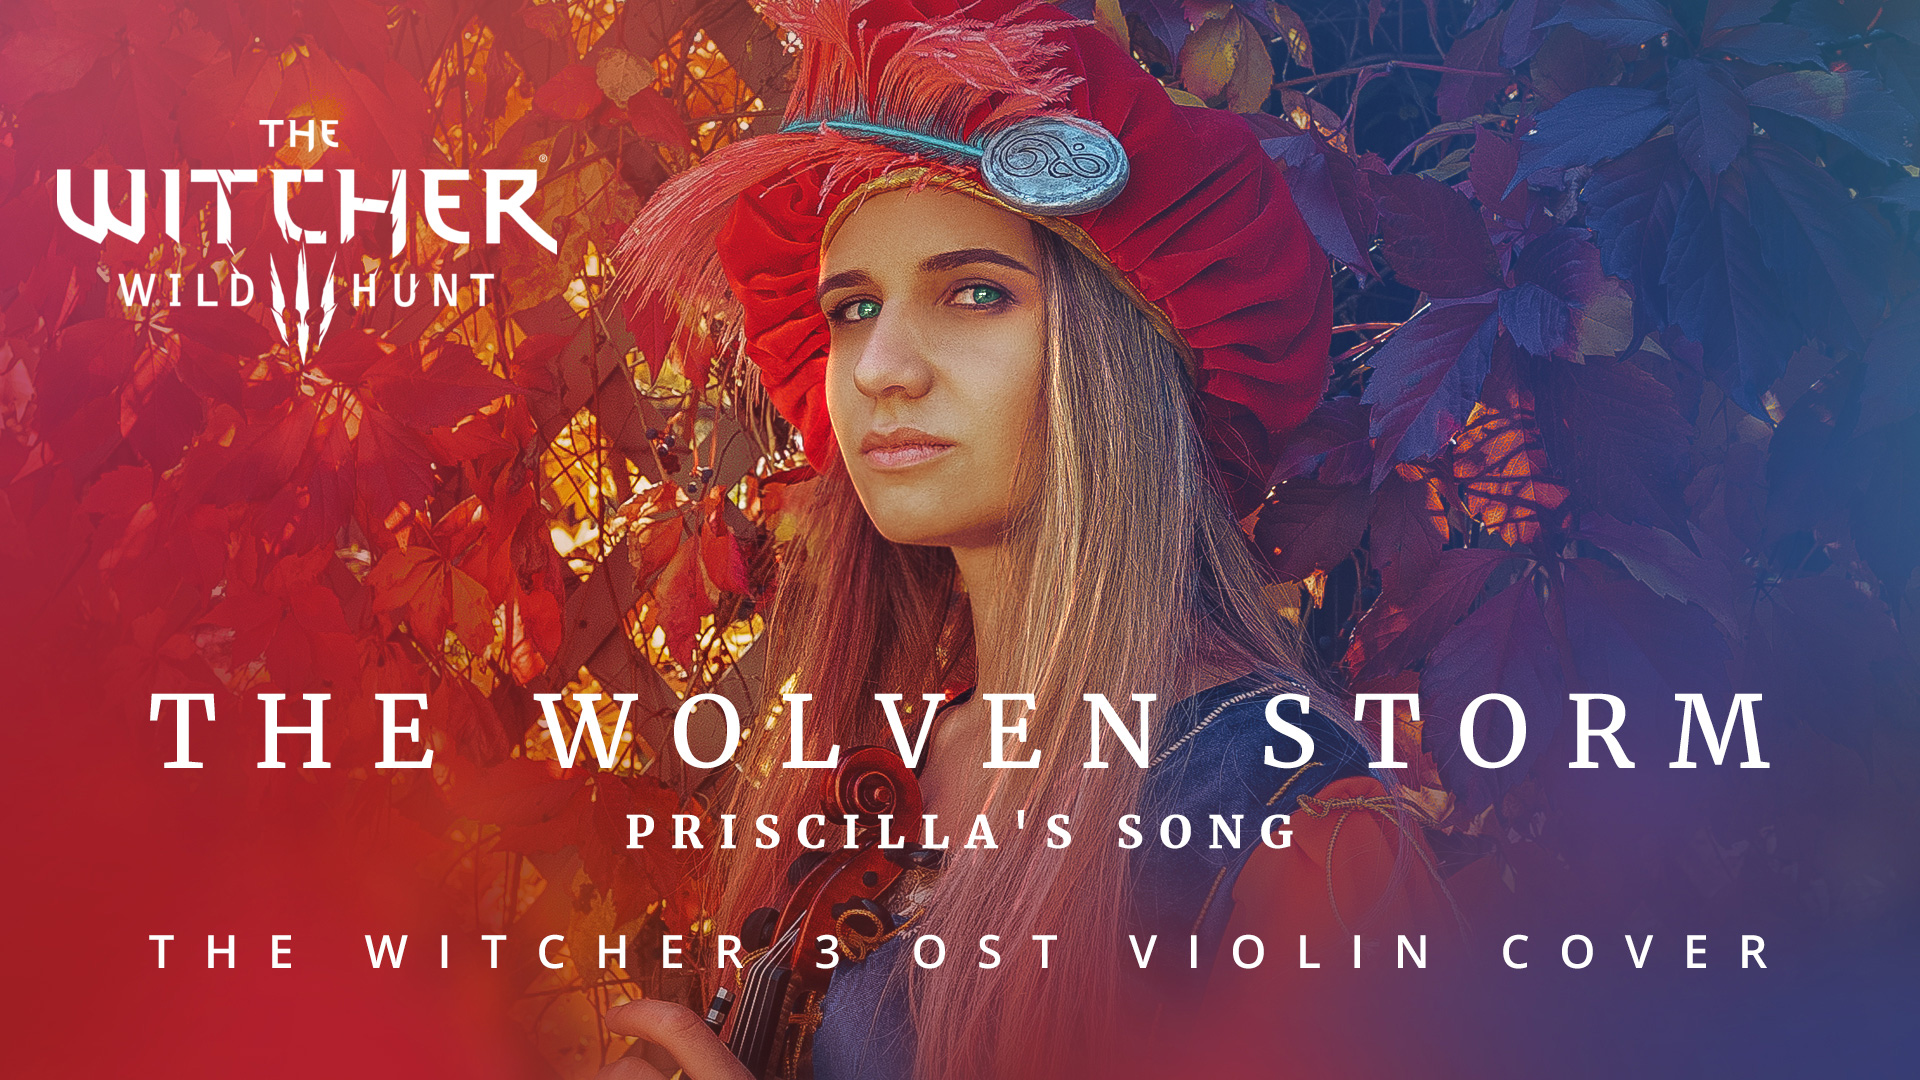 The witcher 3 priscilla the wolven storm фото 24